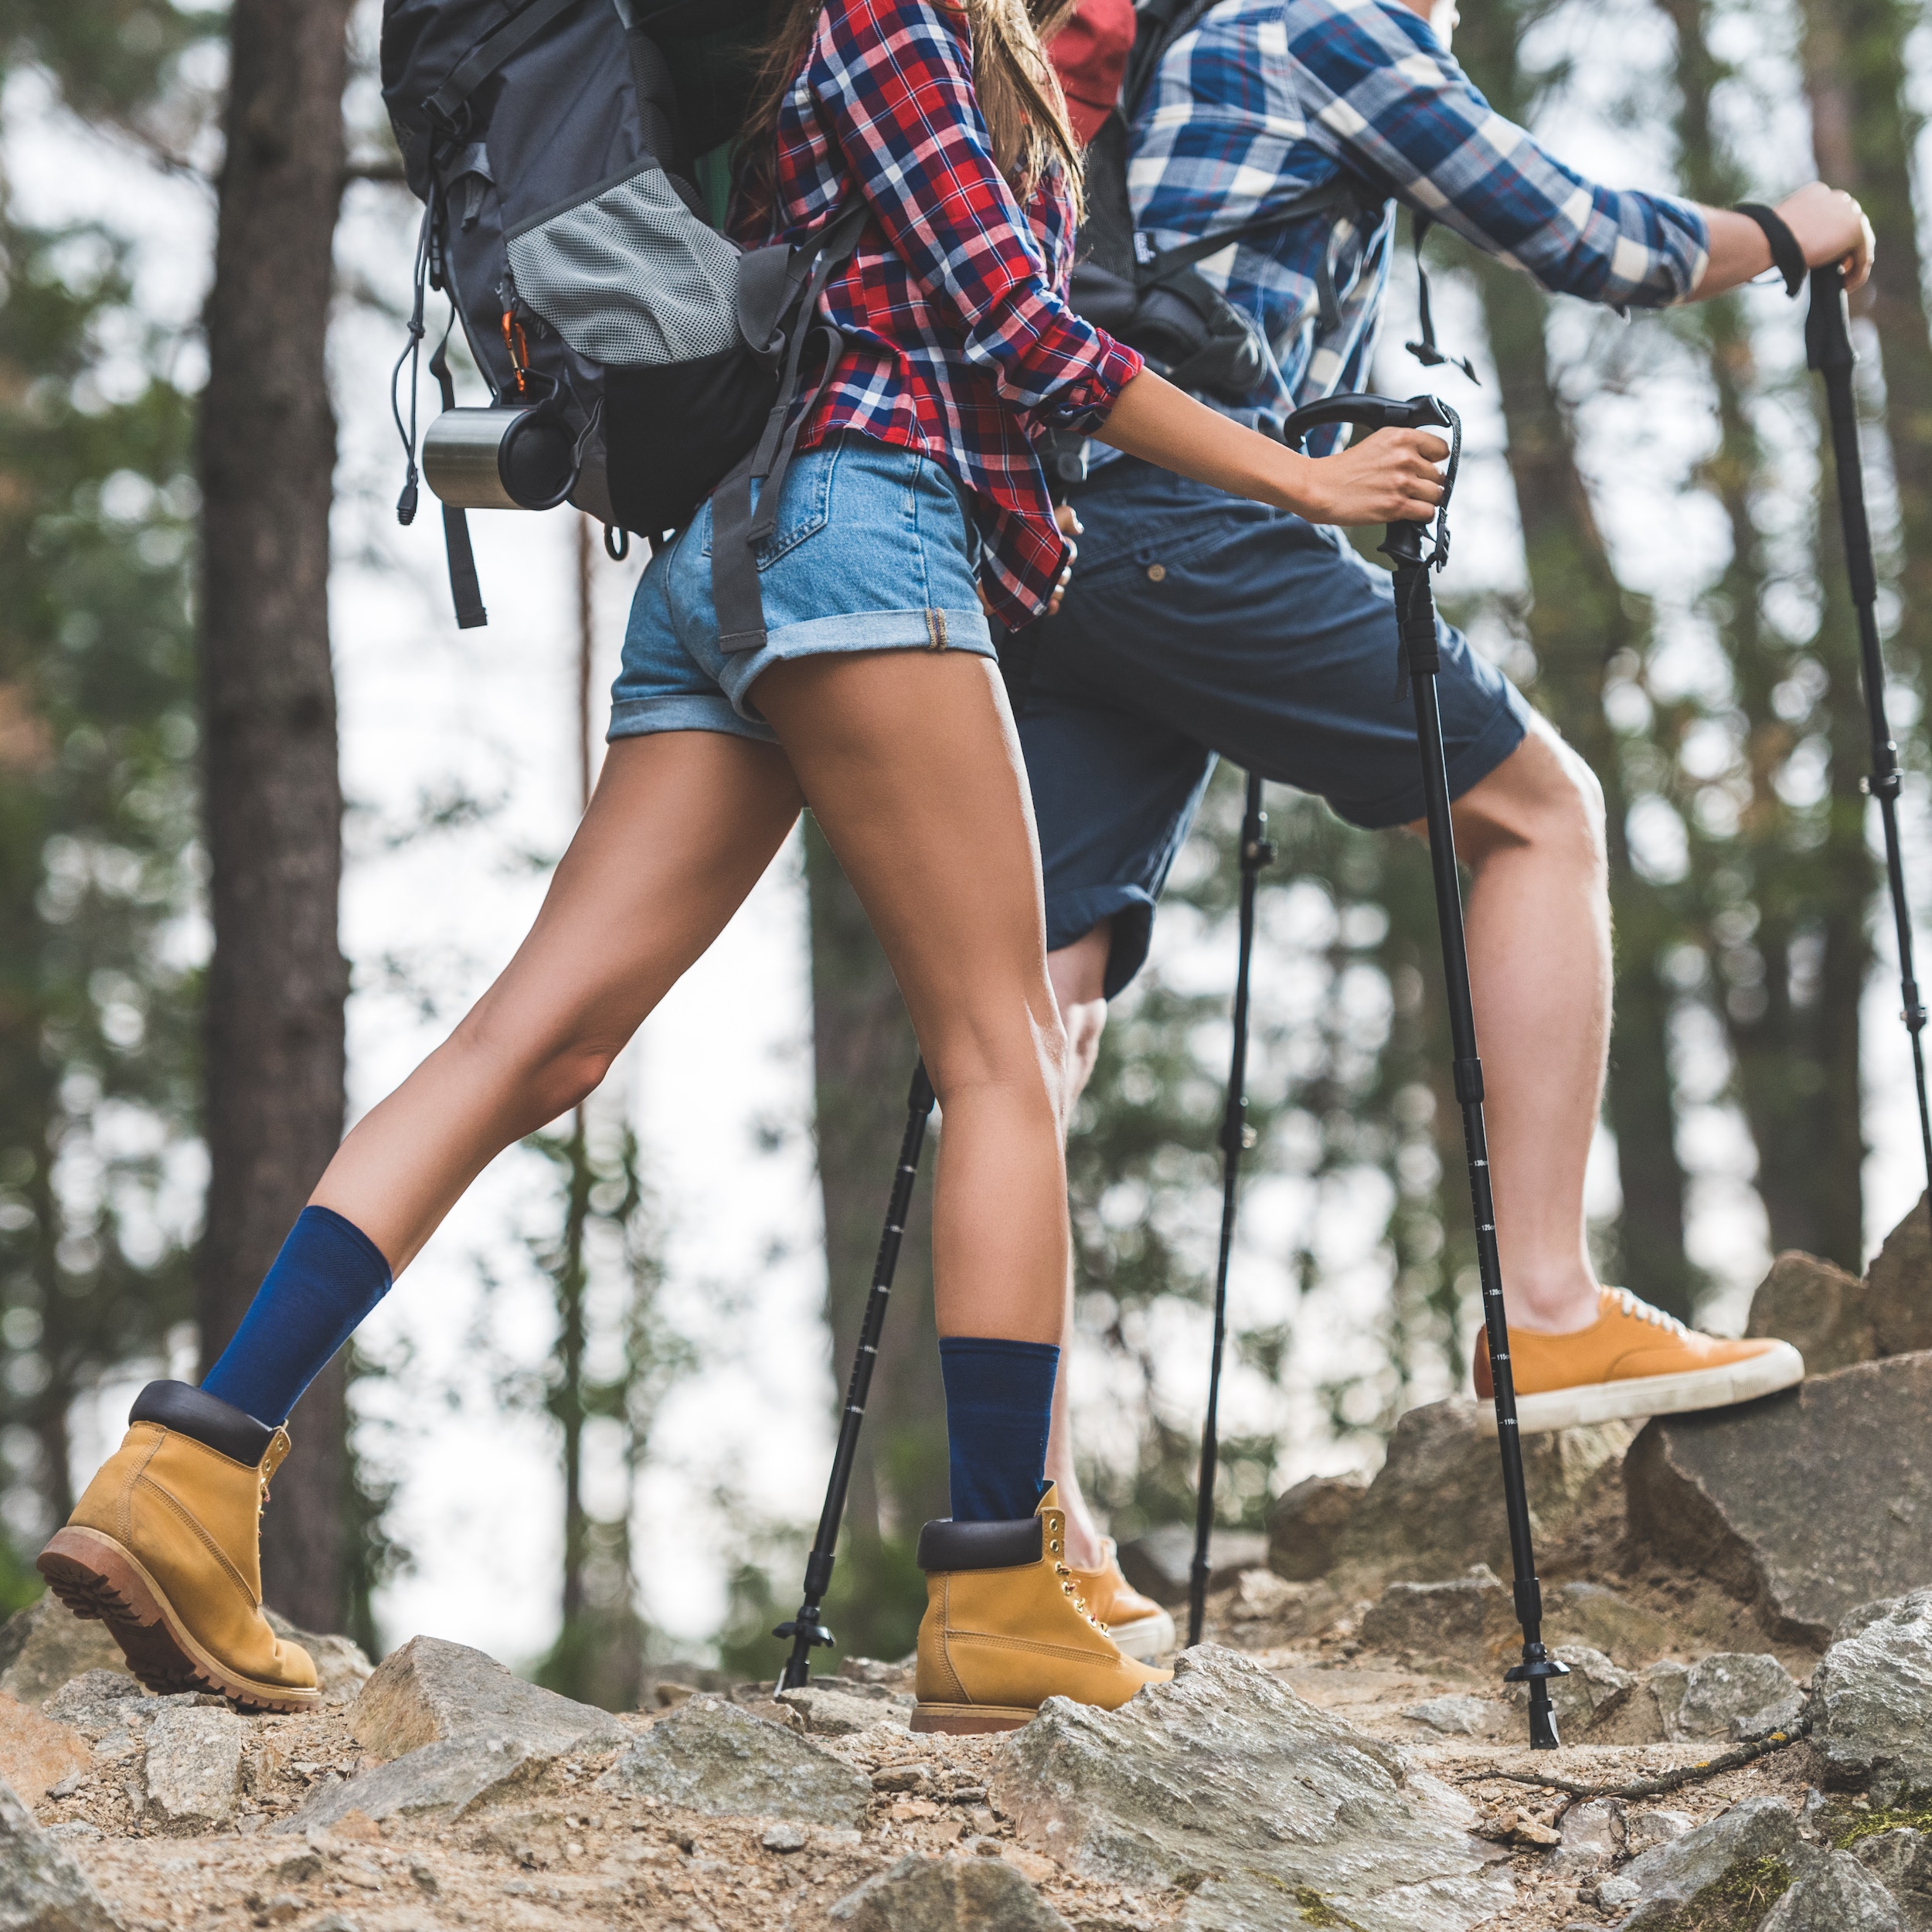 Hiking dating outfits